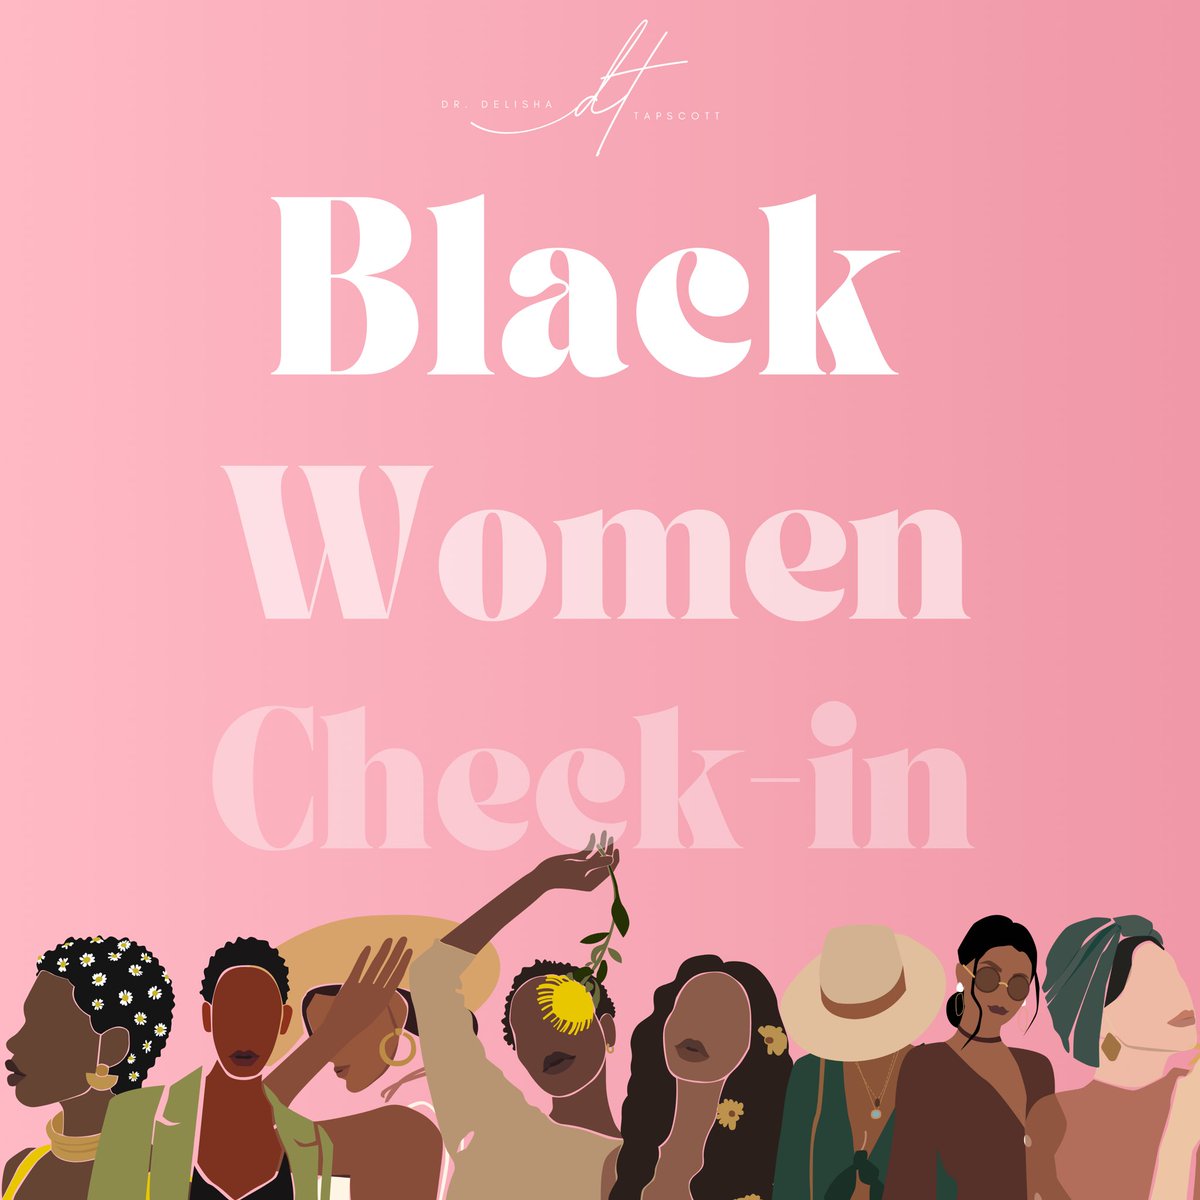 Y'all it's Tuesday! I know y'all didn't forget about Black women check-in! How y'all living?